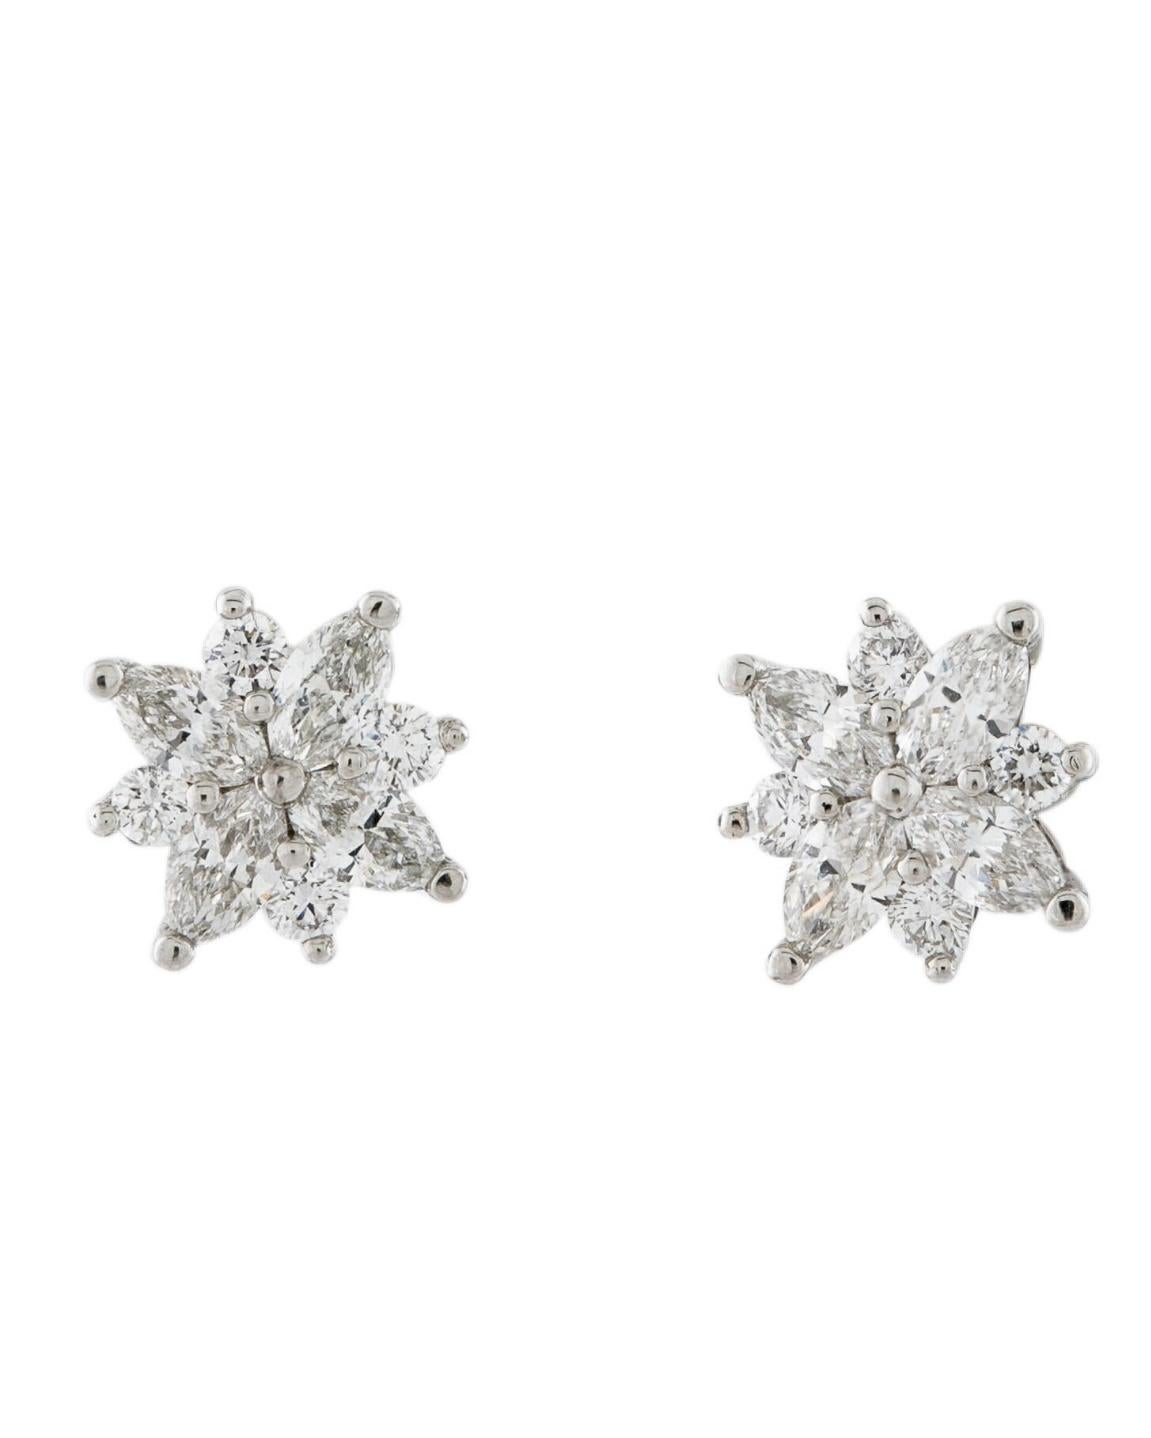 Tiffany Co Victoria cluster earrings , studs
950 PT 
Diamonds approximately weighing 0.70 total 
An amazing pre-owned pair of earrings , discontinued model 
Great investment value 
Comes with: original box  

 